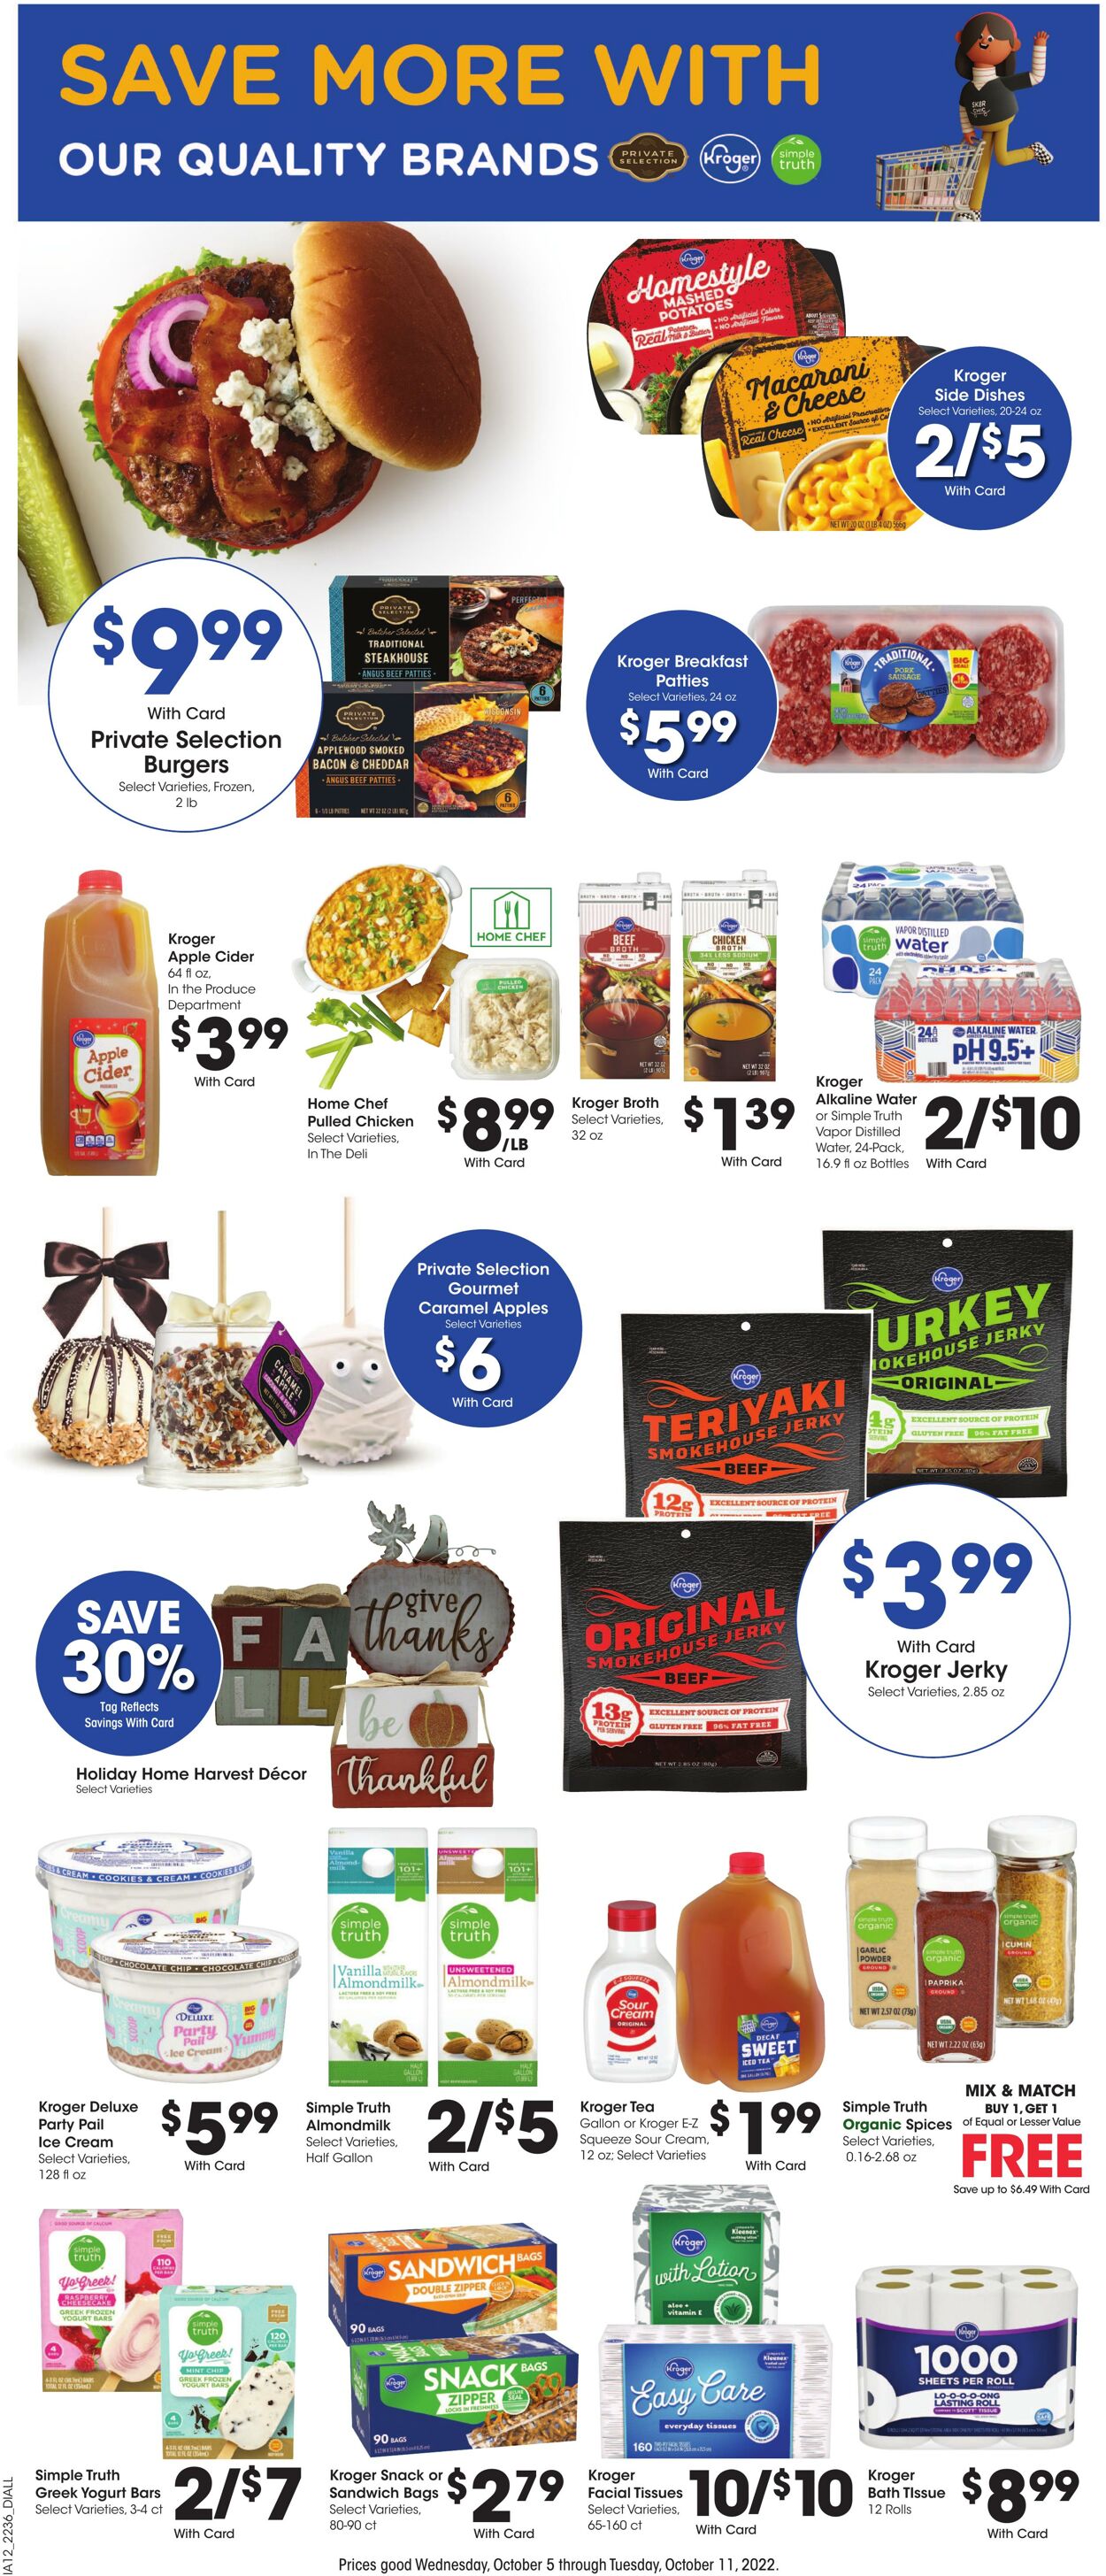 Weekly ad Baker's 10/05/2022 - 10/11/2022